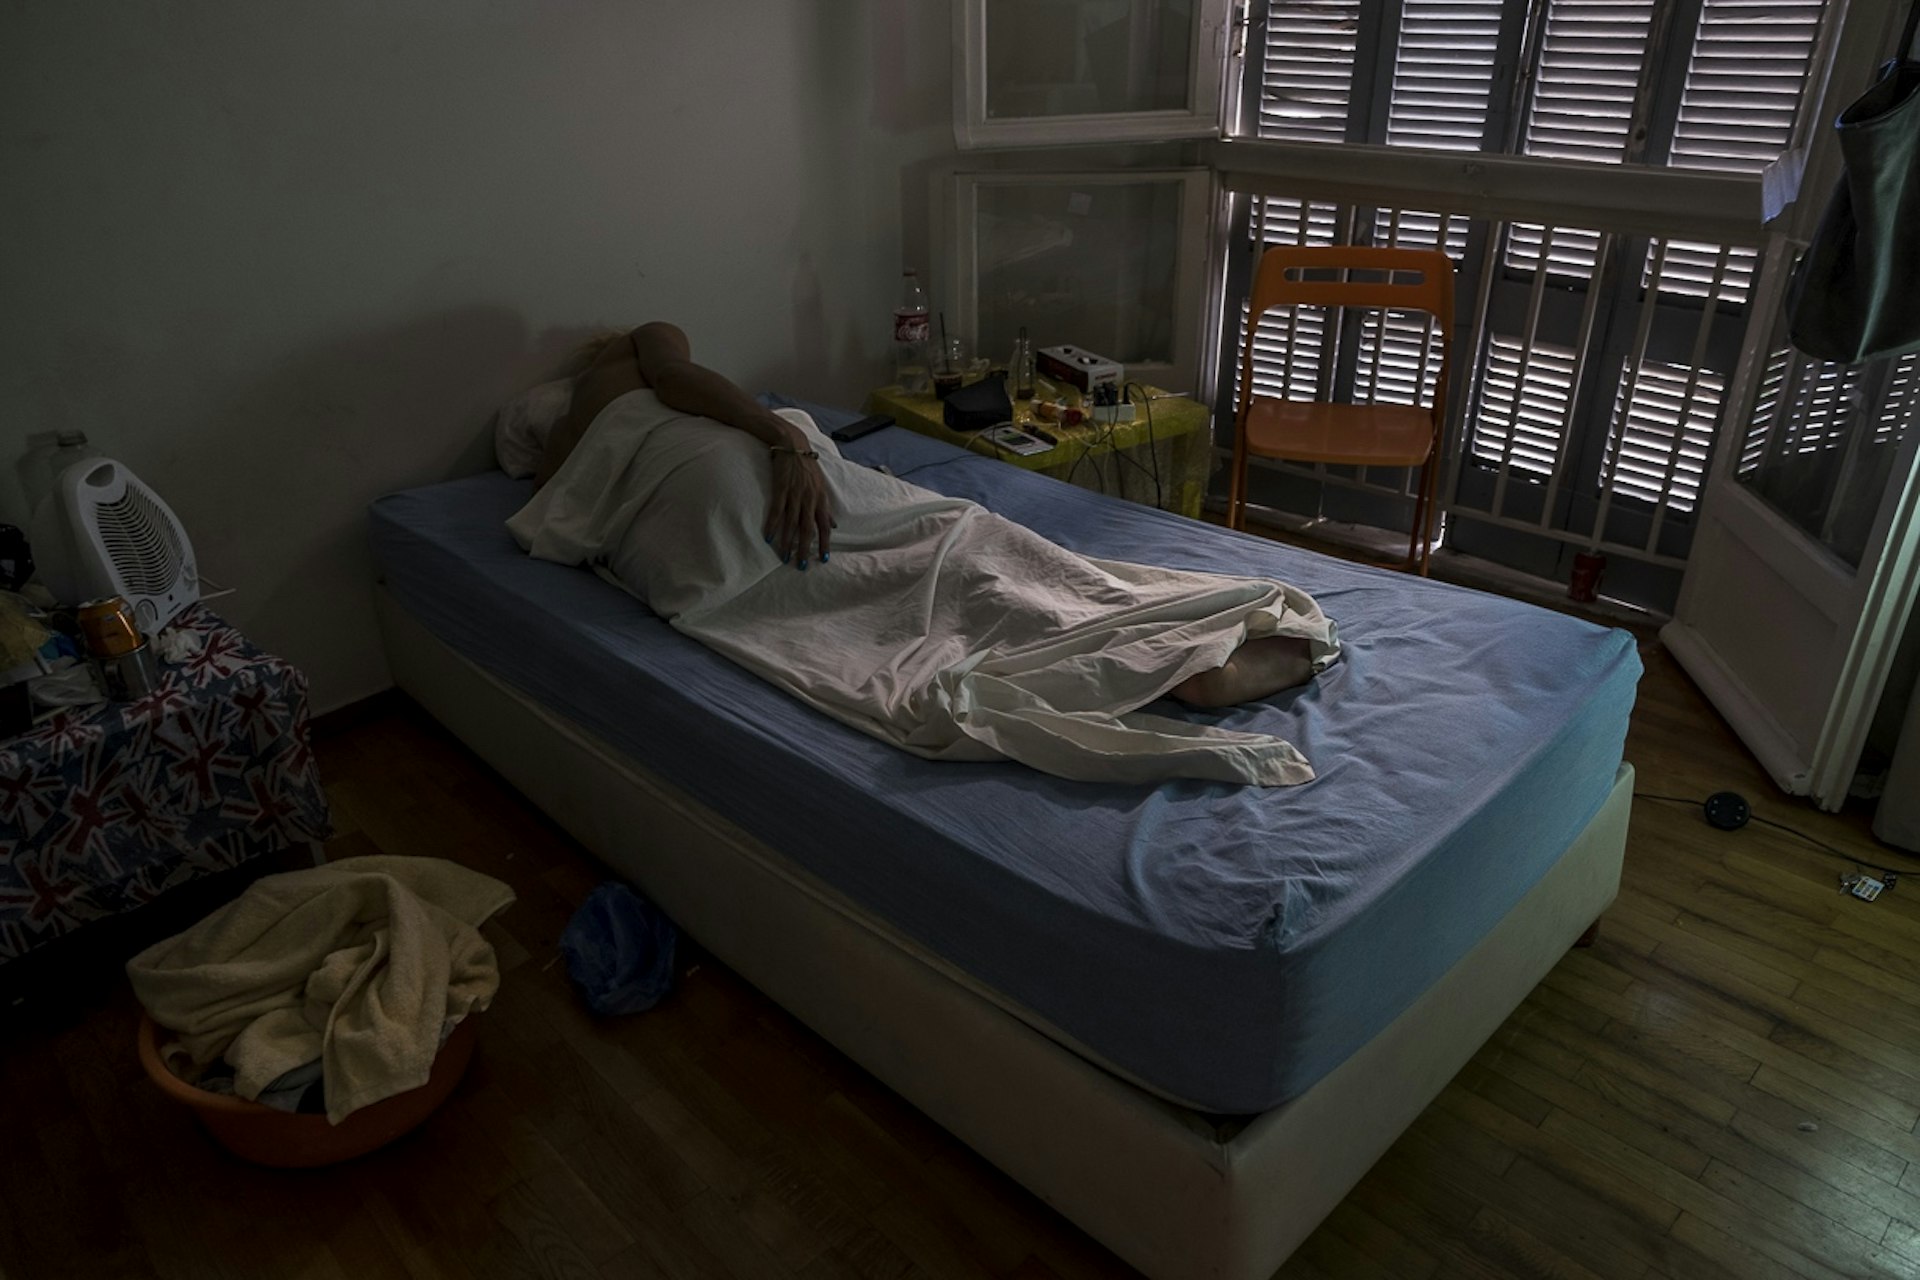 M., a transgender woman from Tunisia, takes a nap at her apartment in Athens, Greece. September 4, 2017